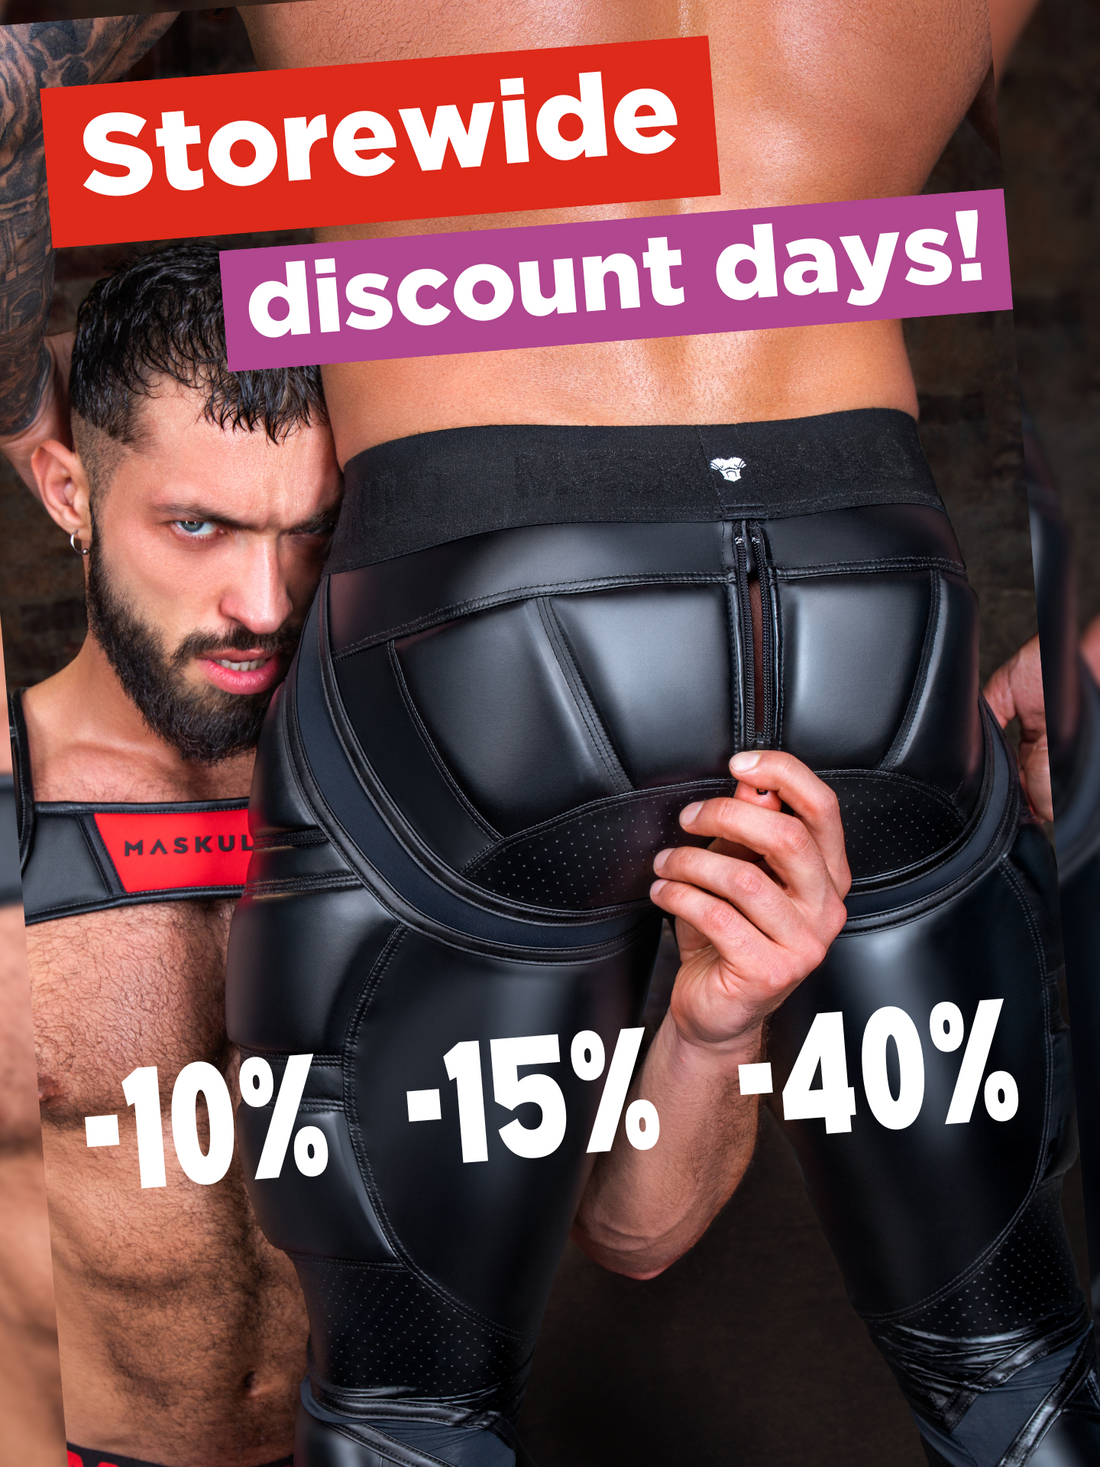 Don't miss out on our discount days! Up to 40% off!